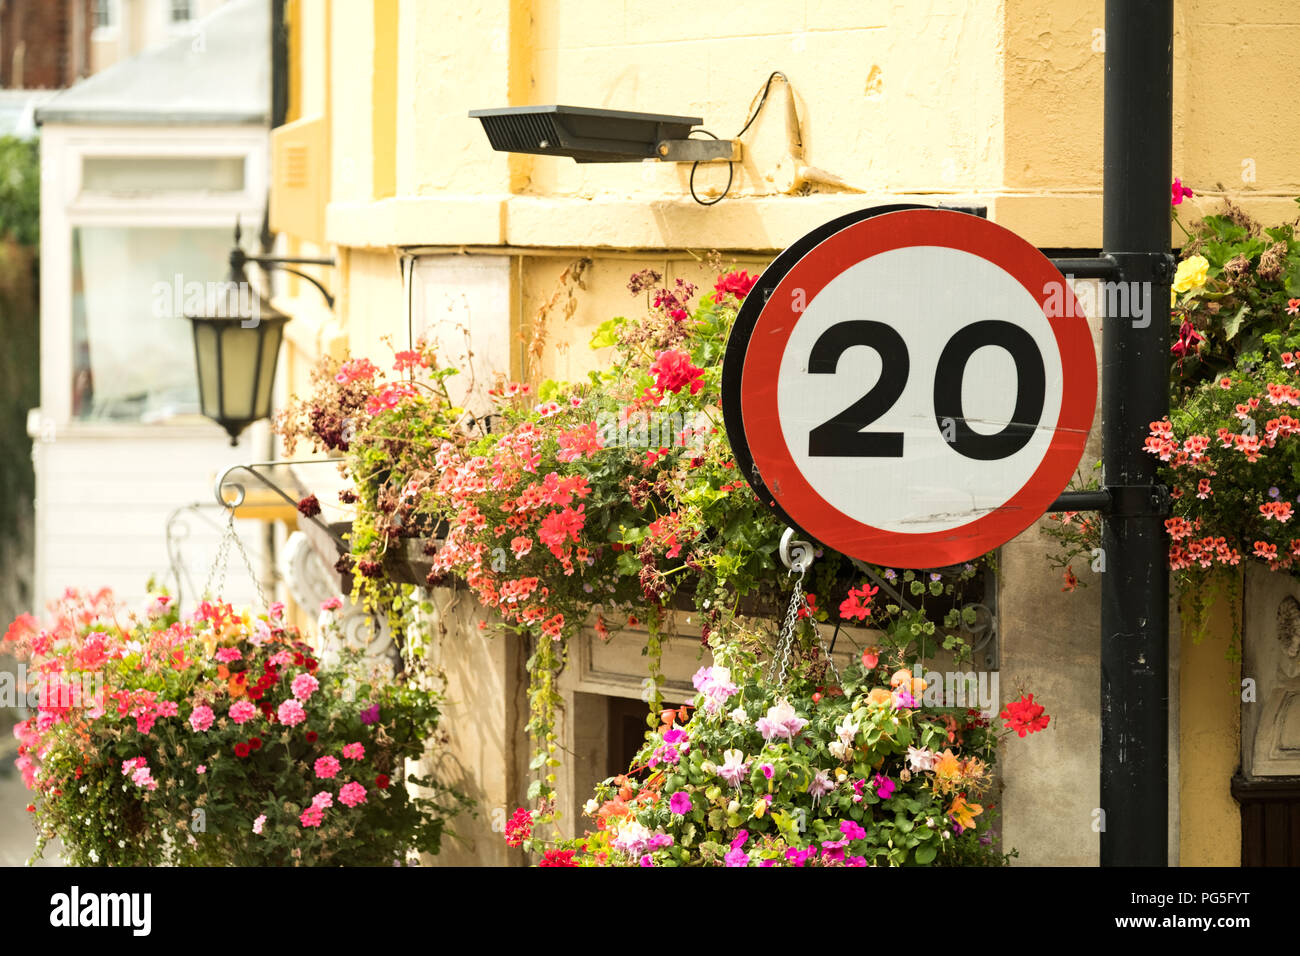 A 20mph British road sign attached to a street lamp on a city street. The sign is next to a residential property decorated with  hanging baskets Stock Photo